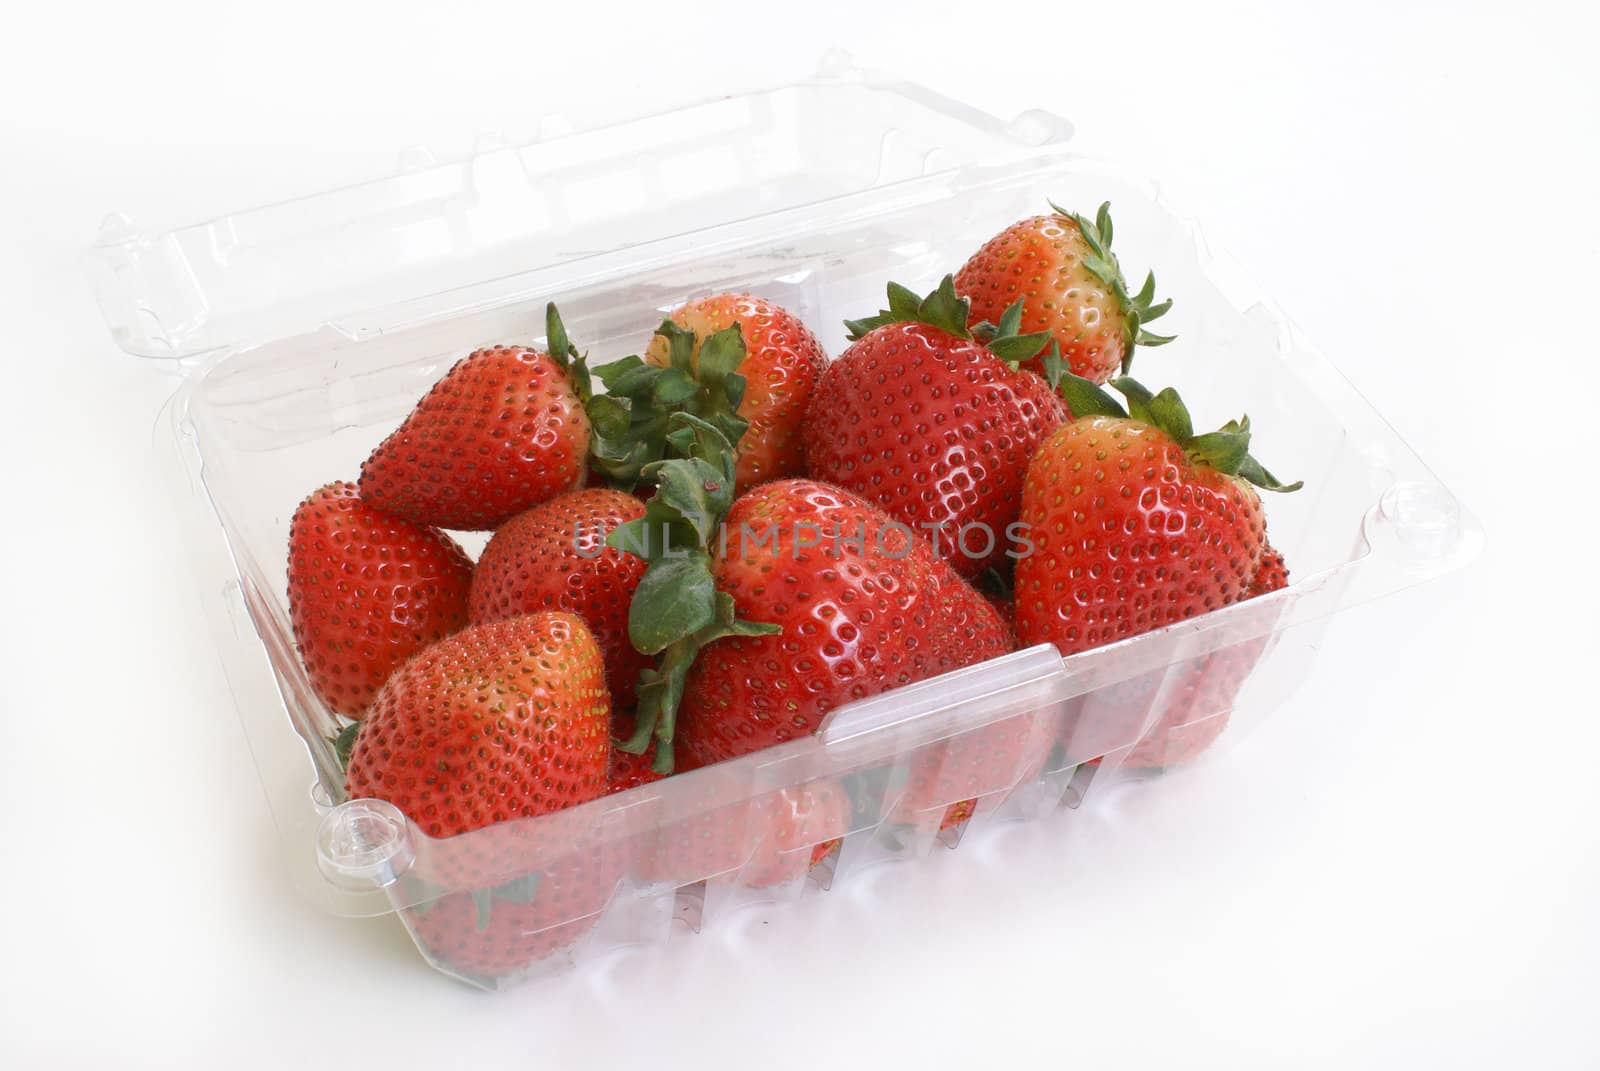 A basket of ripe strawberries on white background.